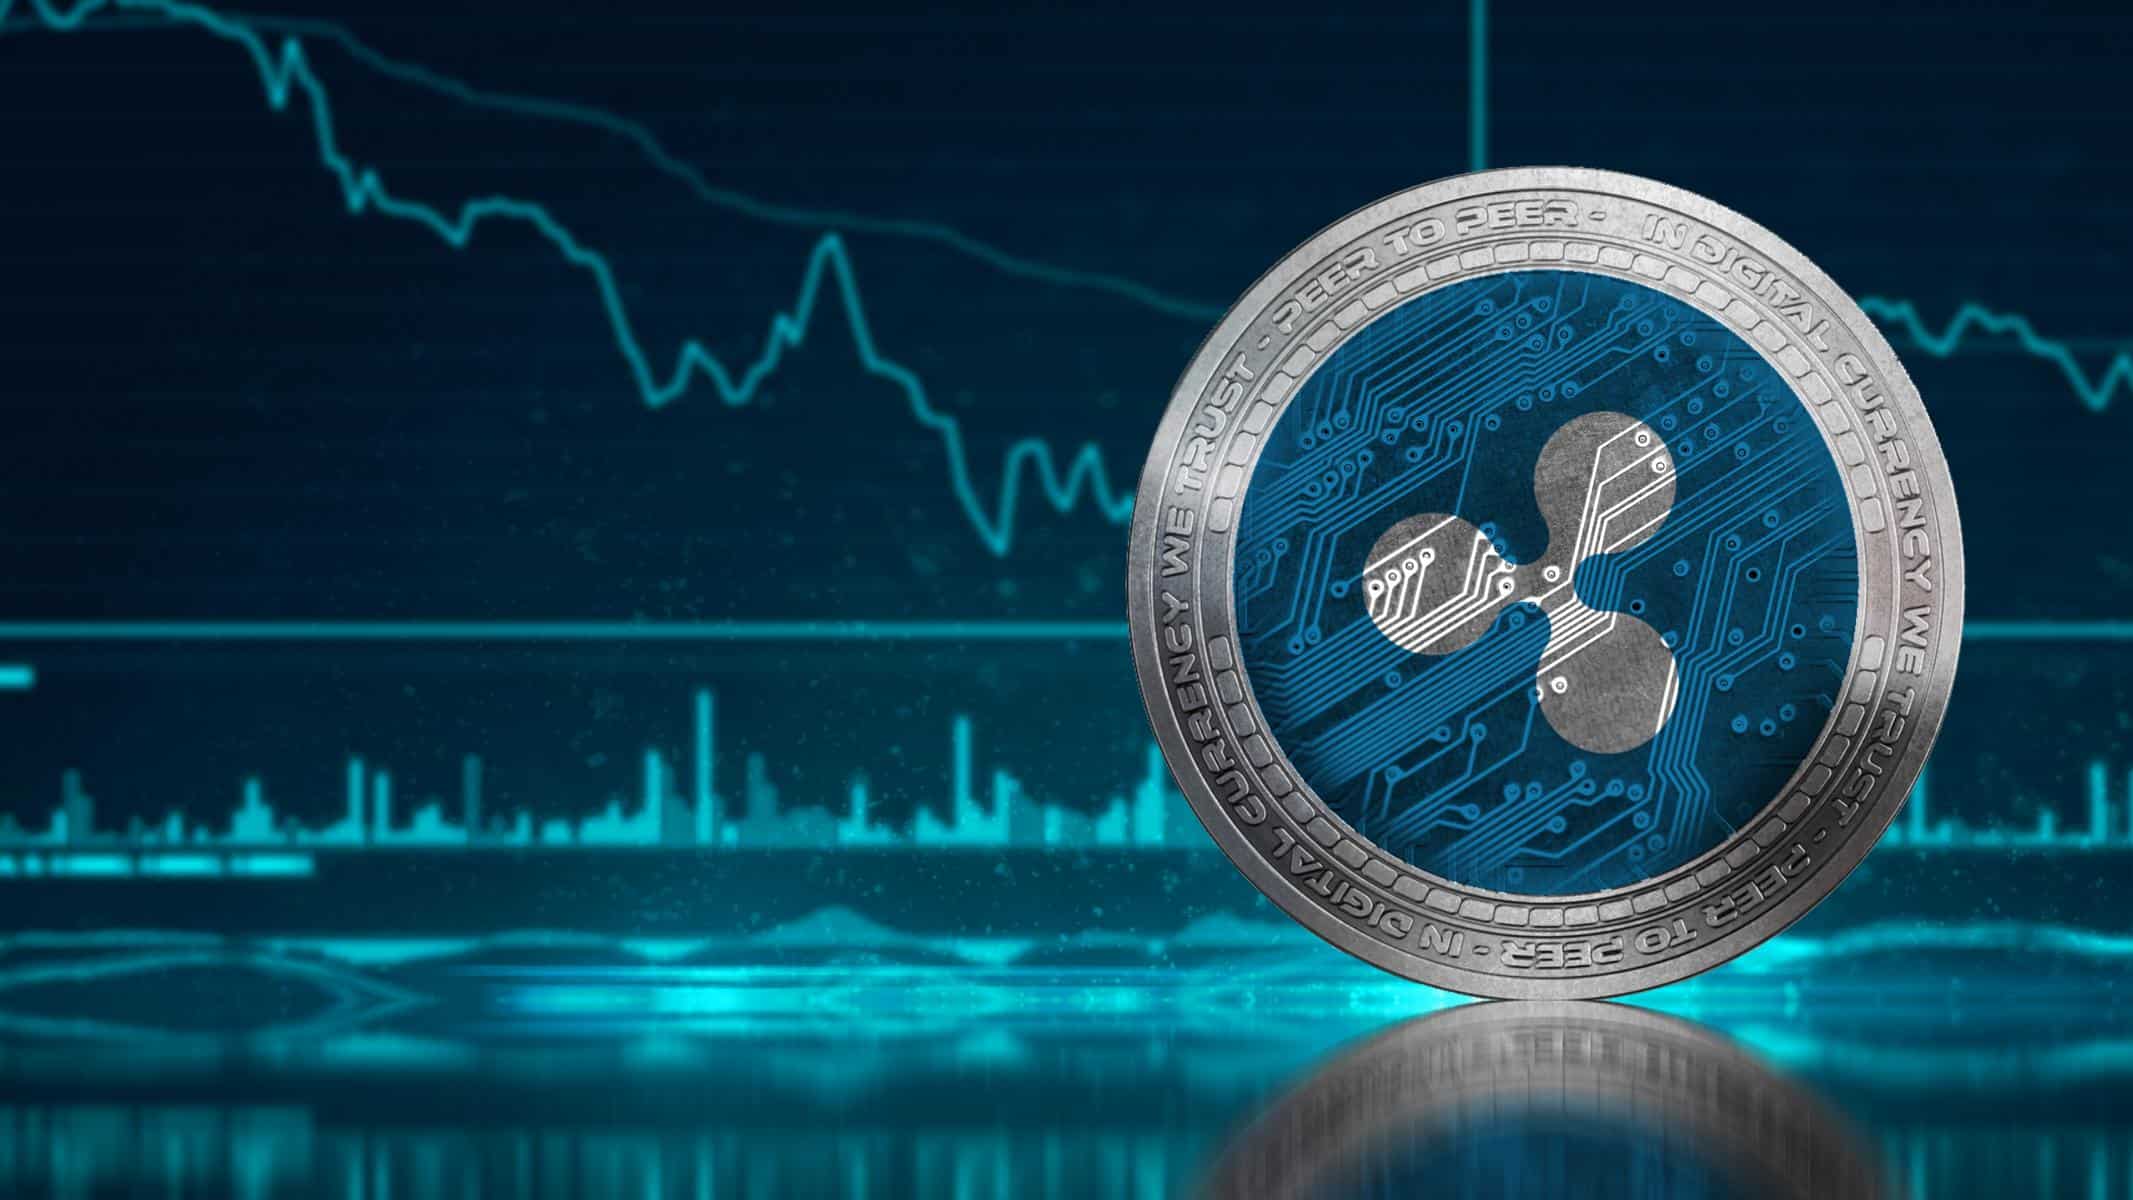 Ripple's XRP has doubled in the run-up to its Swell conference